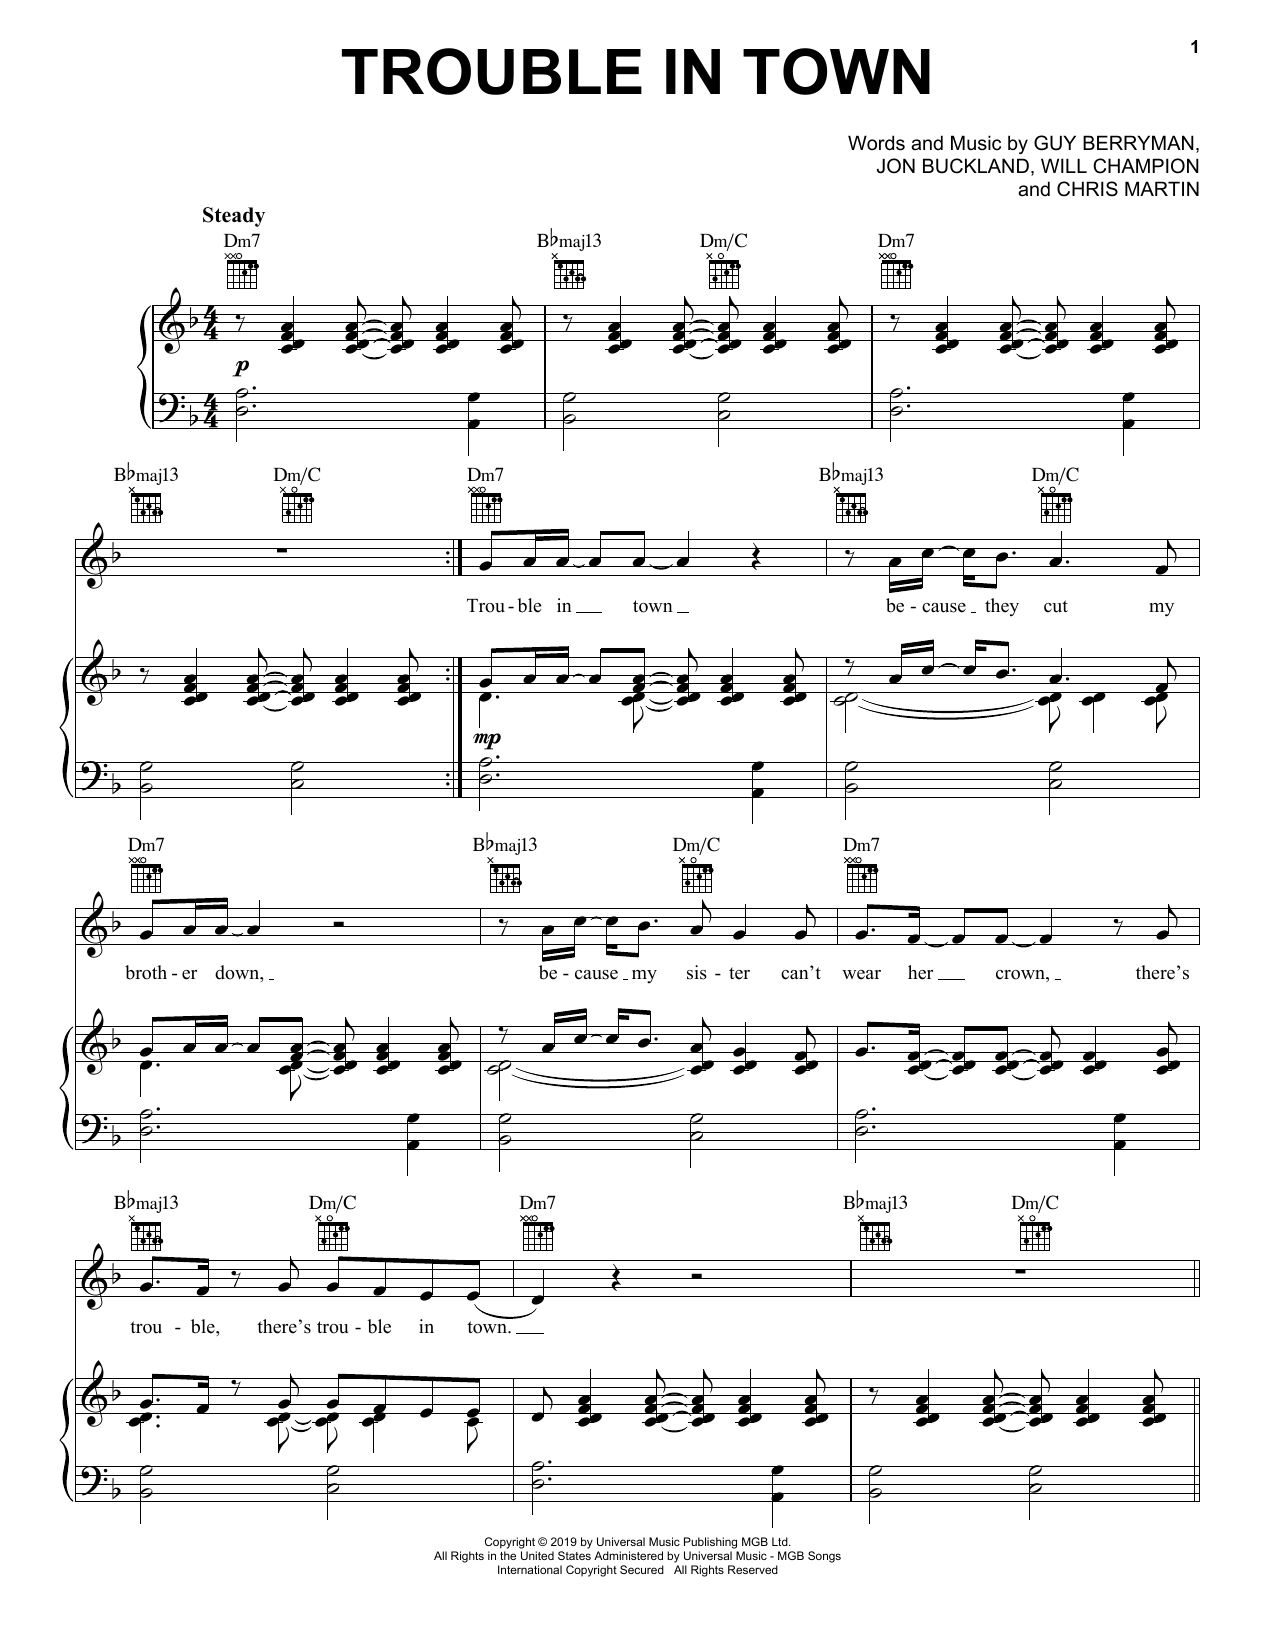 Download Coldplay Trouble In Town Sheet Music